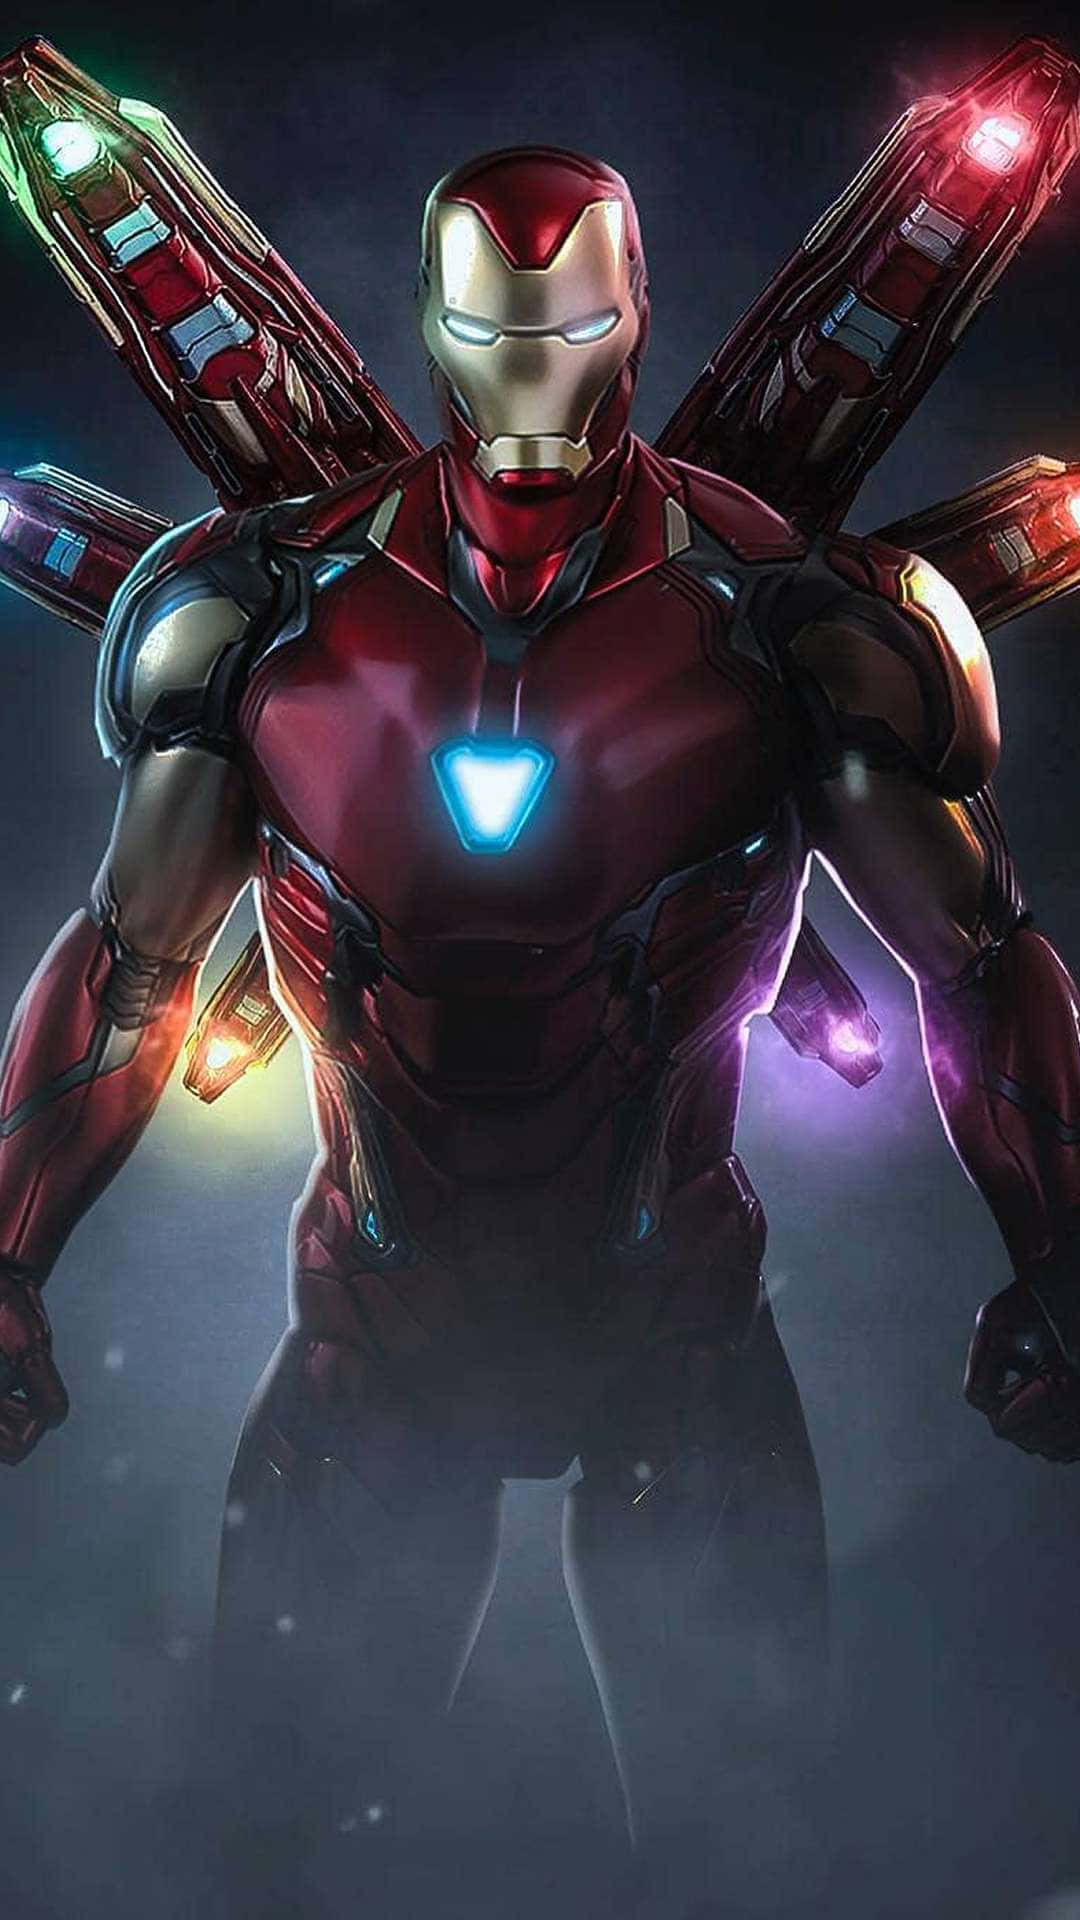 Show off your love of Iron Man with this amazing iPhone wallpaper. Wallpaper